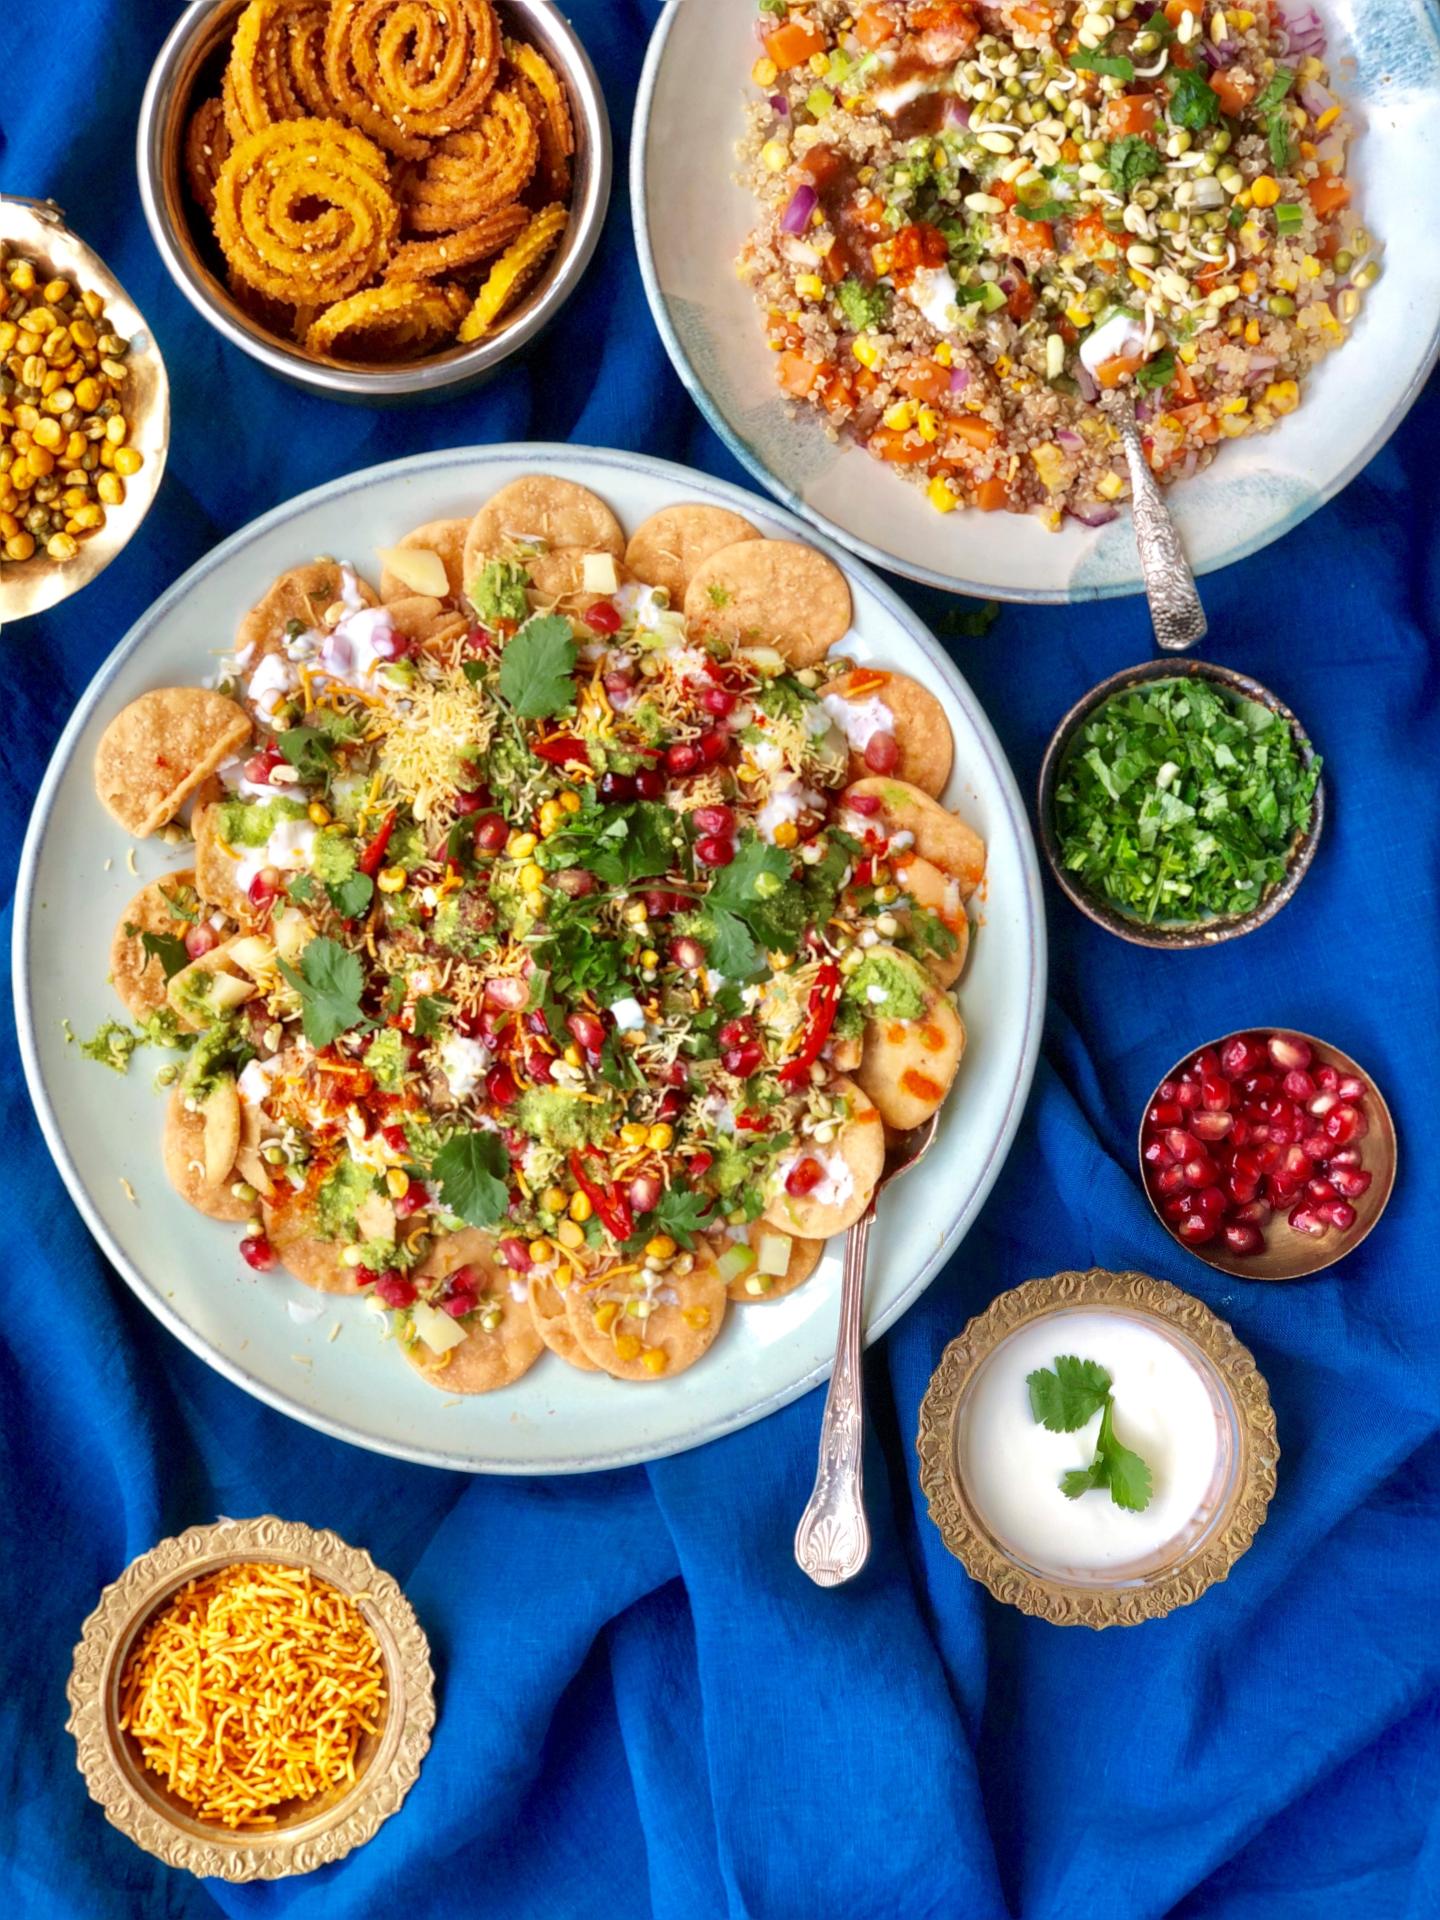 A display of different Indian food dishes laid out on a dark blue tablecloth. Large plates full of bhel and salad are accompanied with smaller dishes with chutneys and yoghurt